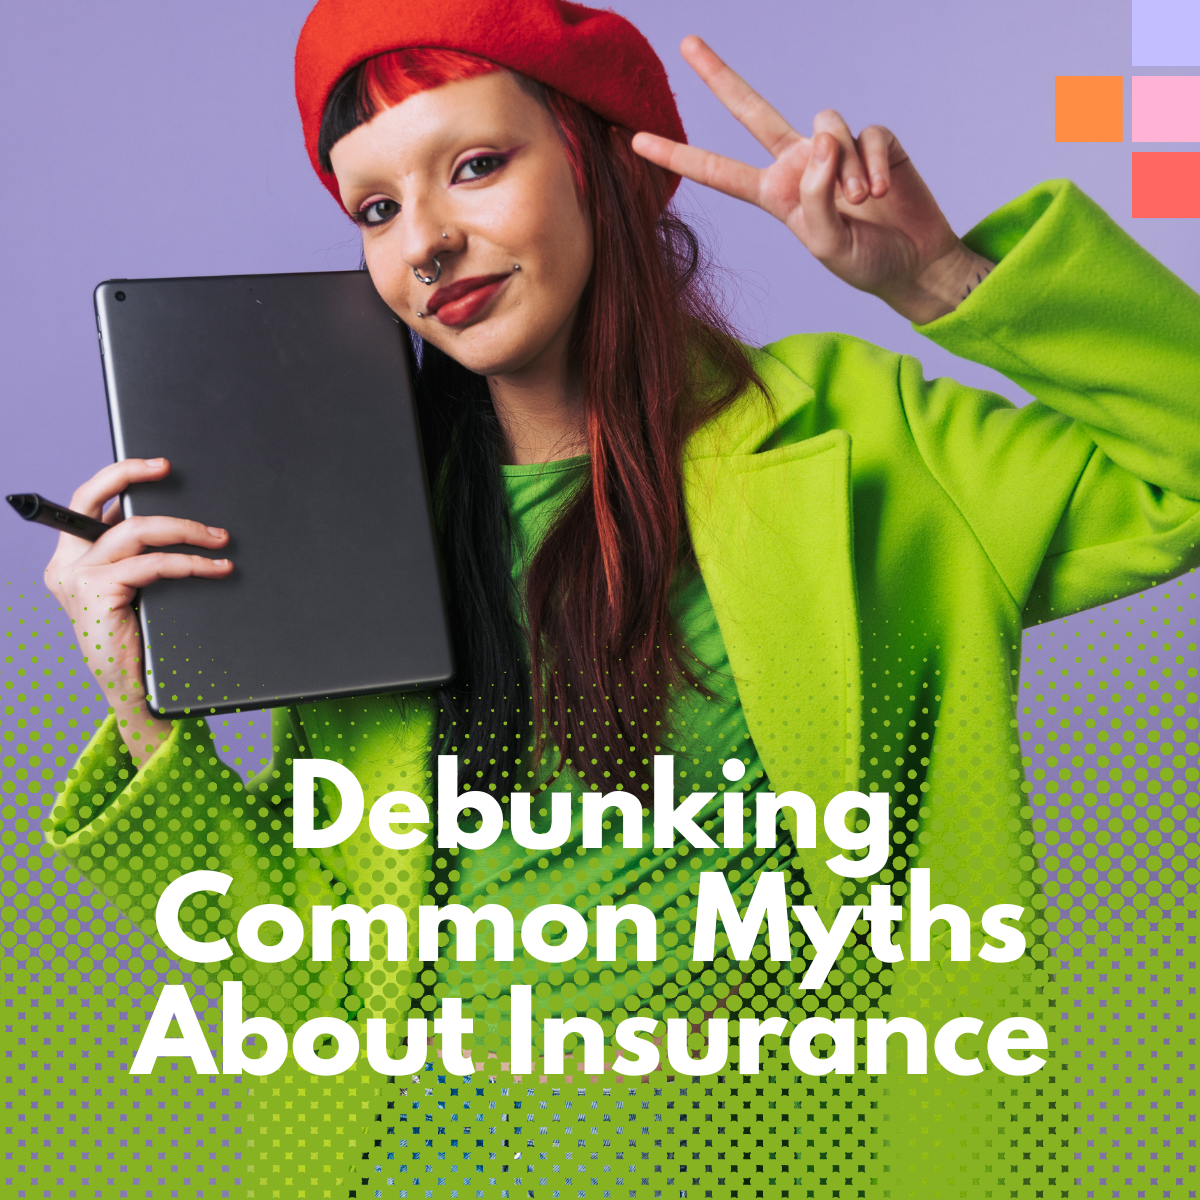 Debunking Myths About Insurance